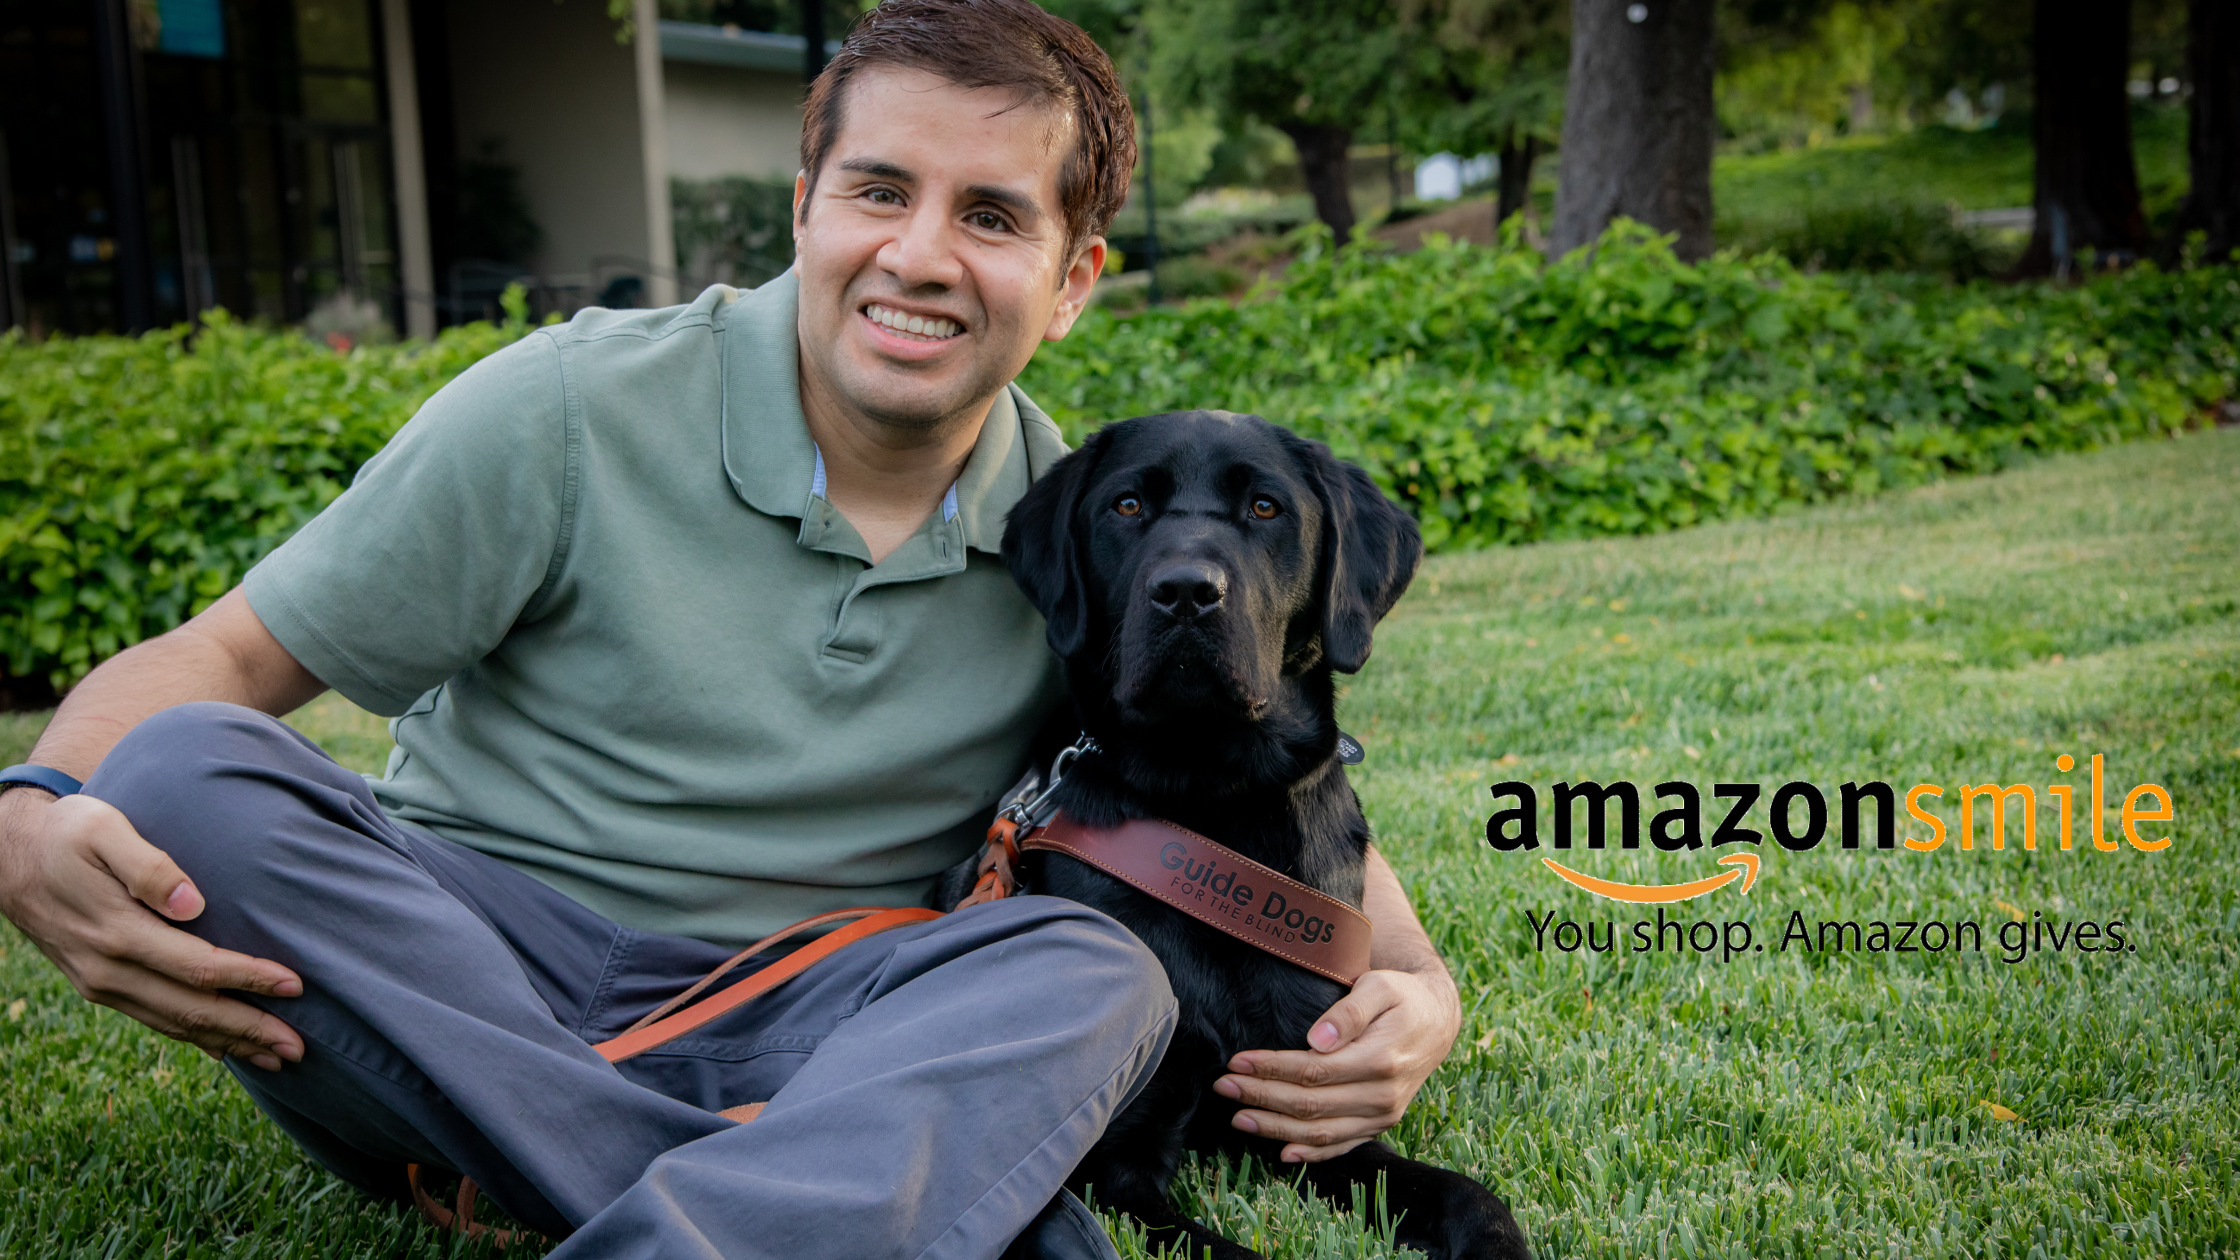 Belo Cipriani is seated on the grass beside his black Lab guide dog, Limo. The AmazonSmile logo appears to the right.